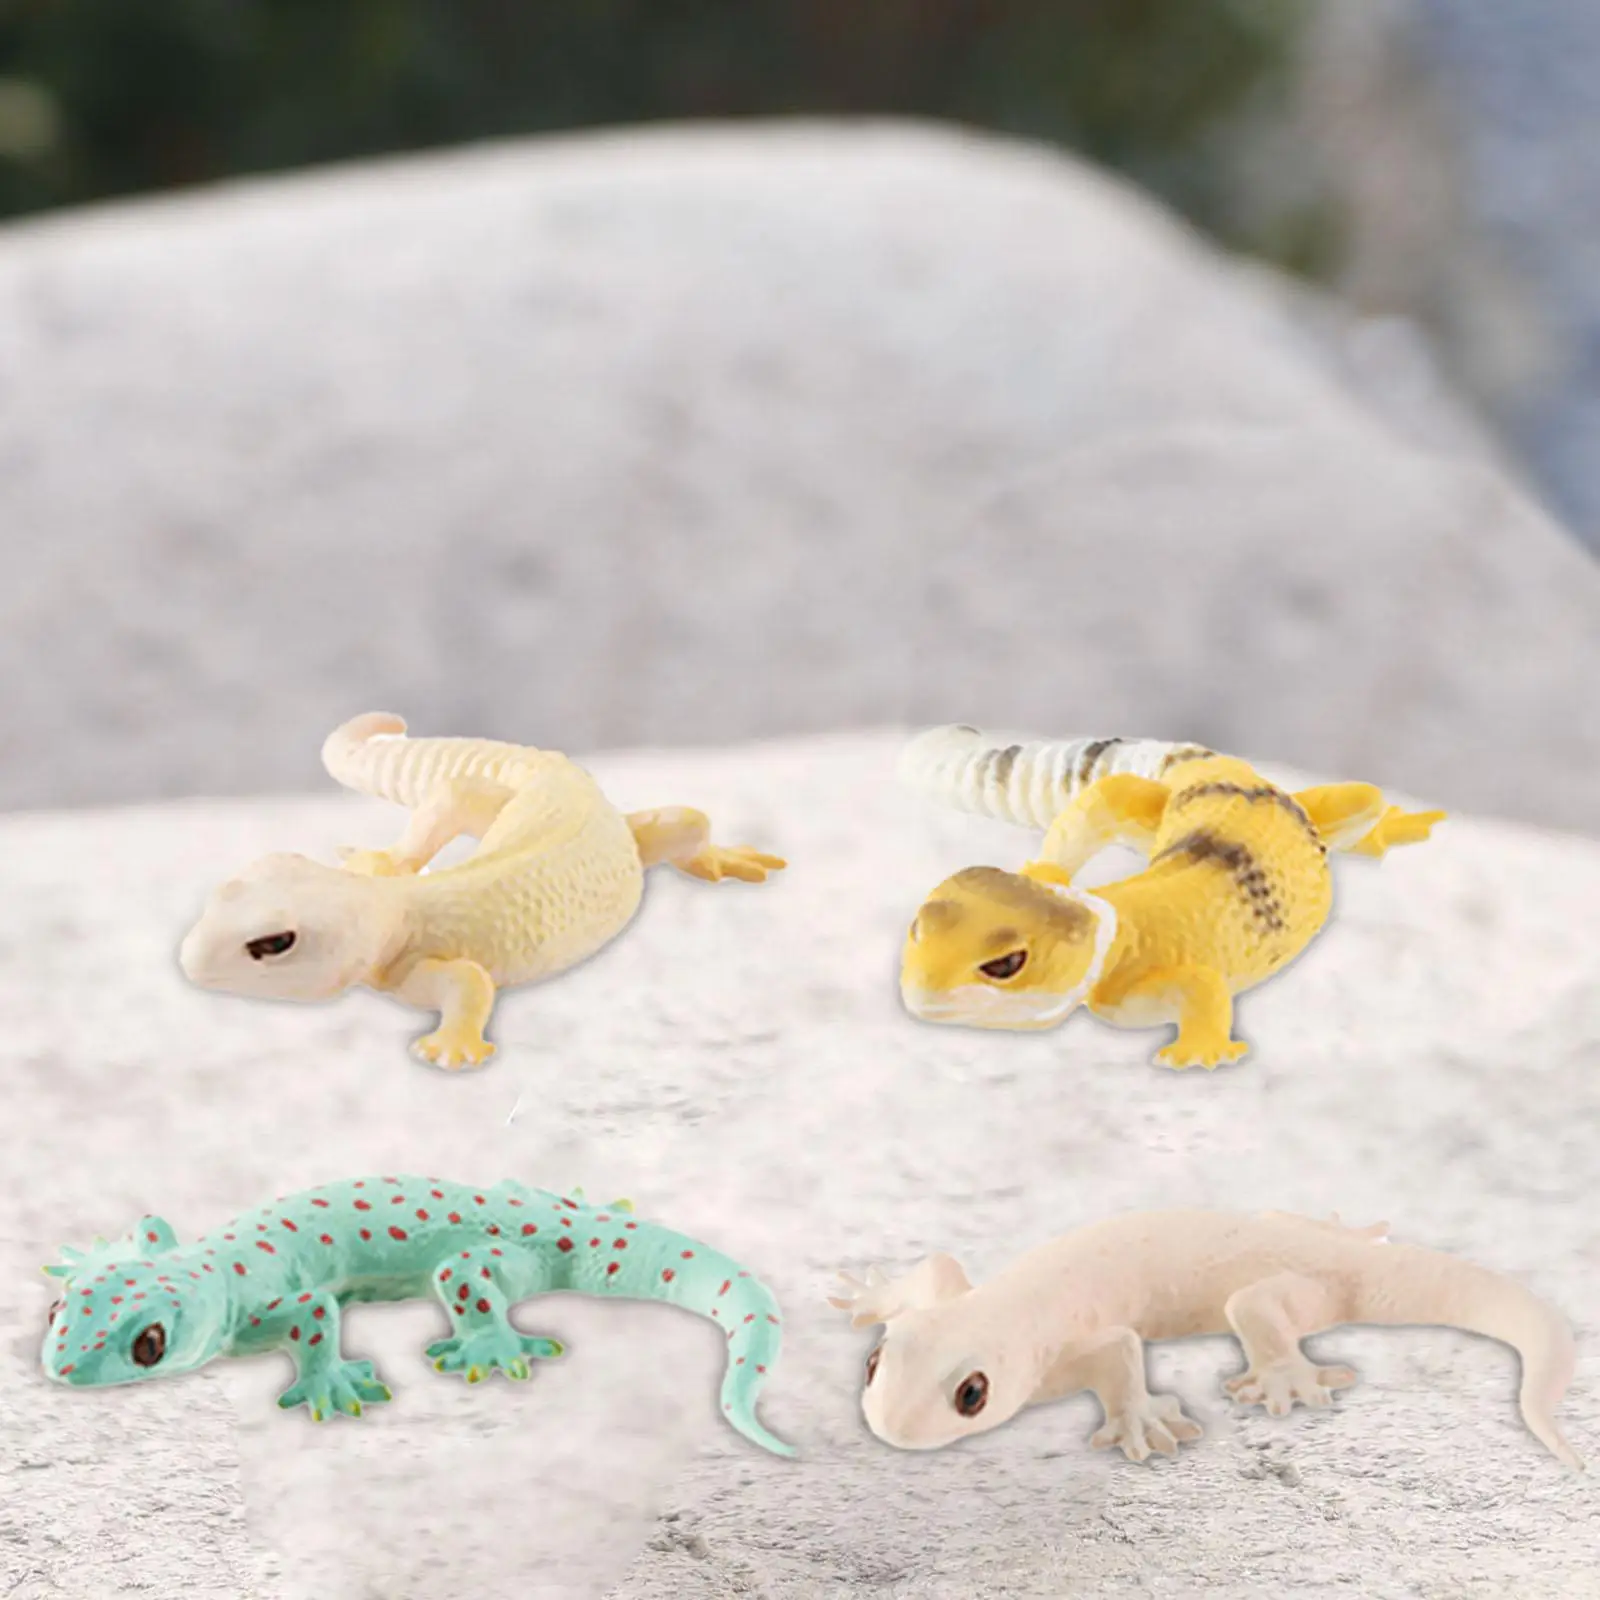 4x Mini Animals Model Gifts Decorations Lizards Toy for Scene Layout Props DIY Projects